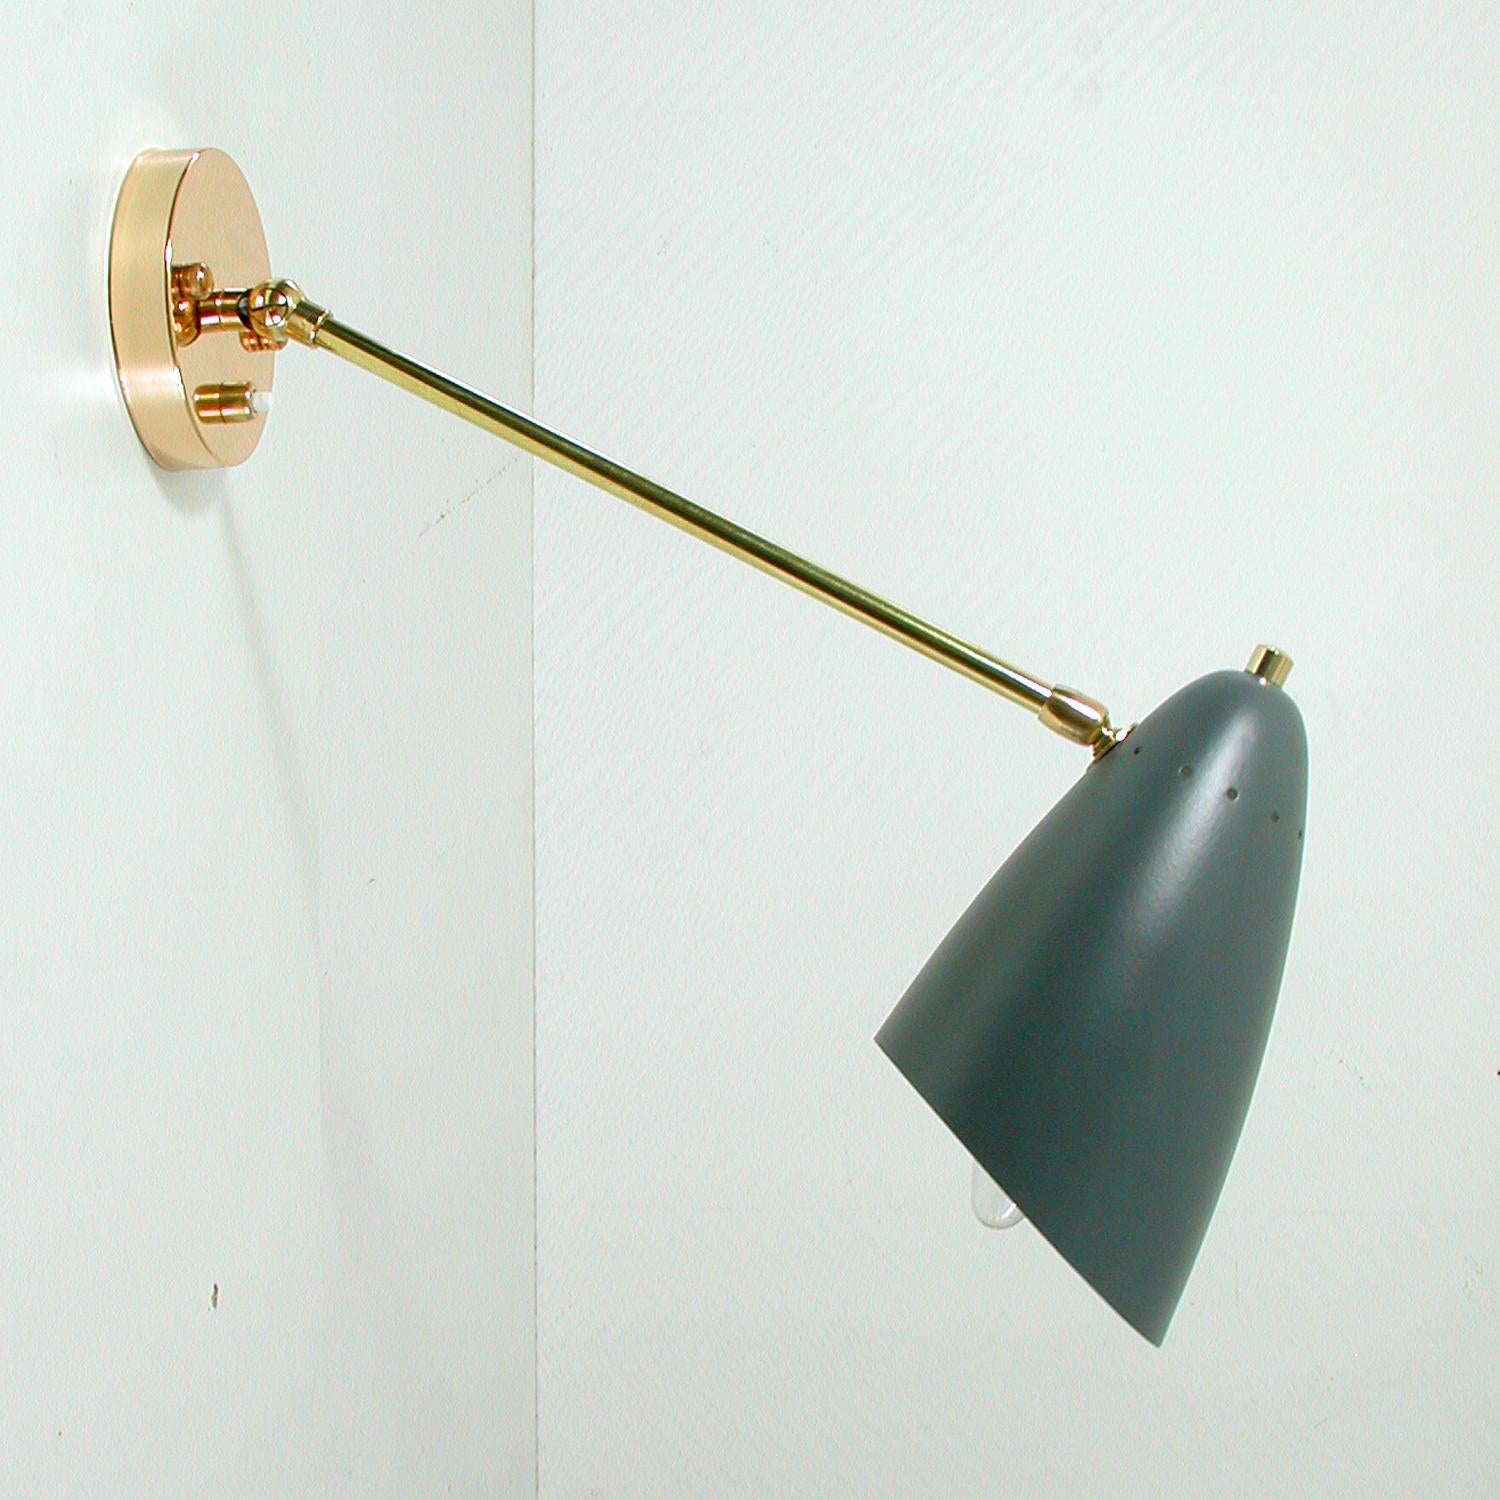 This elegant 1950s midcentury wall lamp / light fixture was designed and manufactured in Italy.

The wall light has got a dark grey lacquered shade, brass adjustable lamp arm and brass black plate (4 inches / 10 cm). The shade is also adjustable.